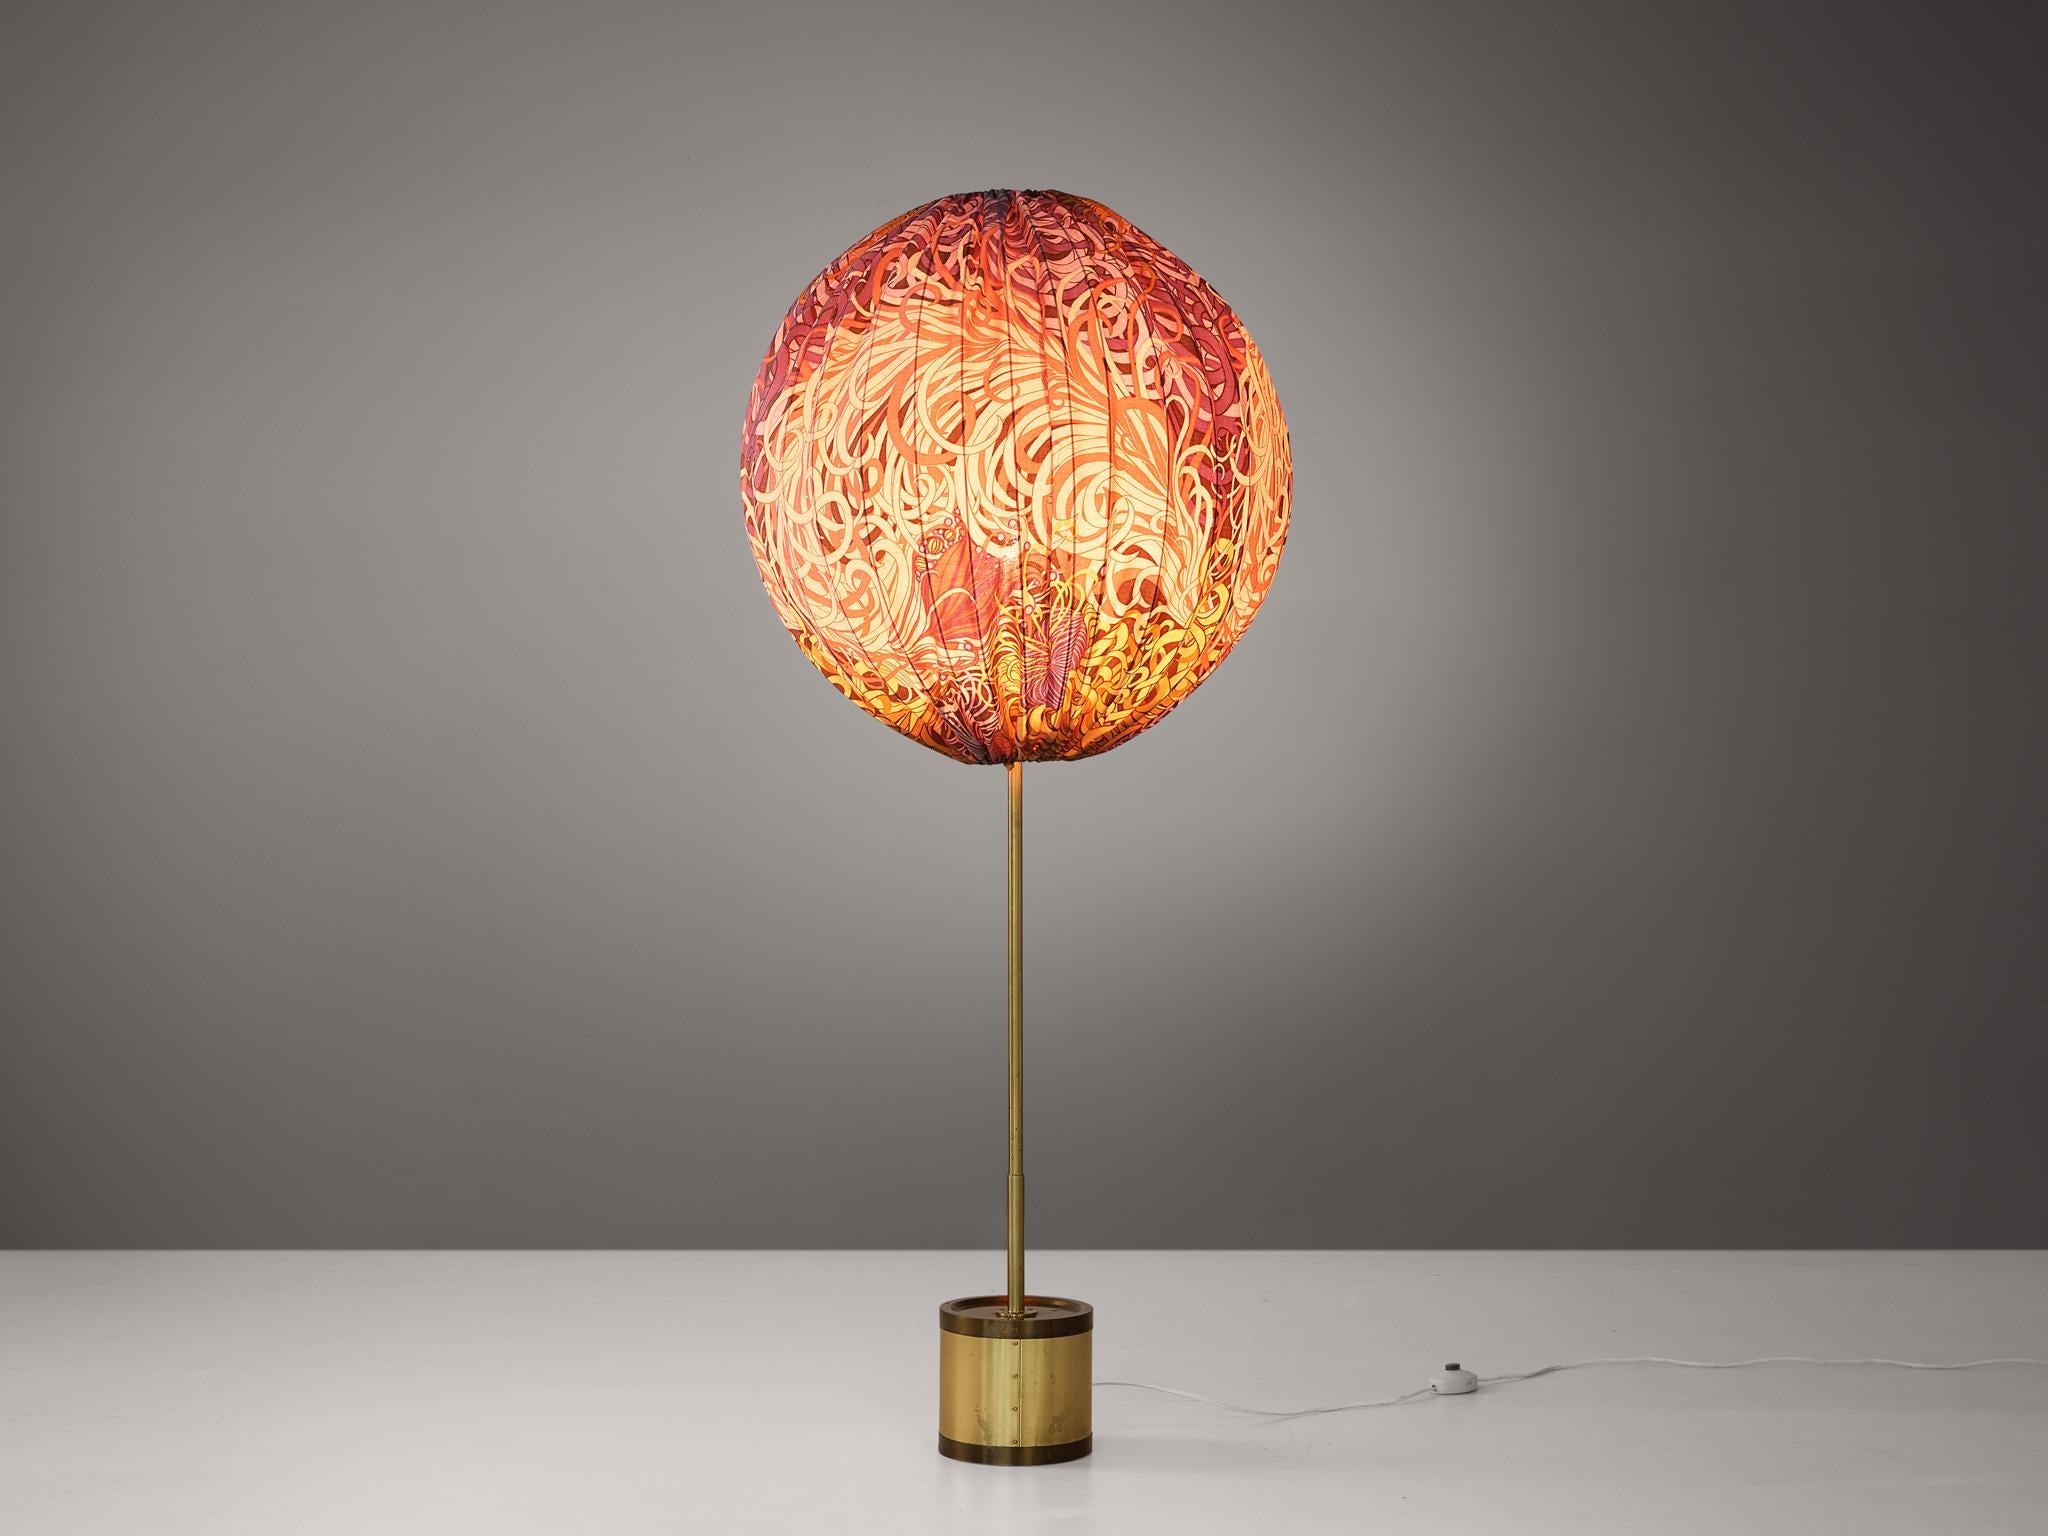 Hans-Agne Jakobsson for Hans-Agne Jakobsson AB in Markaryd, floor lamp model G123, brass, metal, fabric, Sweden, 1960s

This playful 'Balloon' lamp was design by Hans-Agne Jakobsson in the 1960s. The circular lampshade catches the eye. A floral